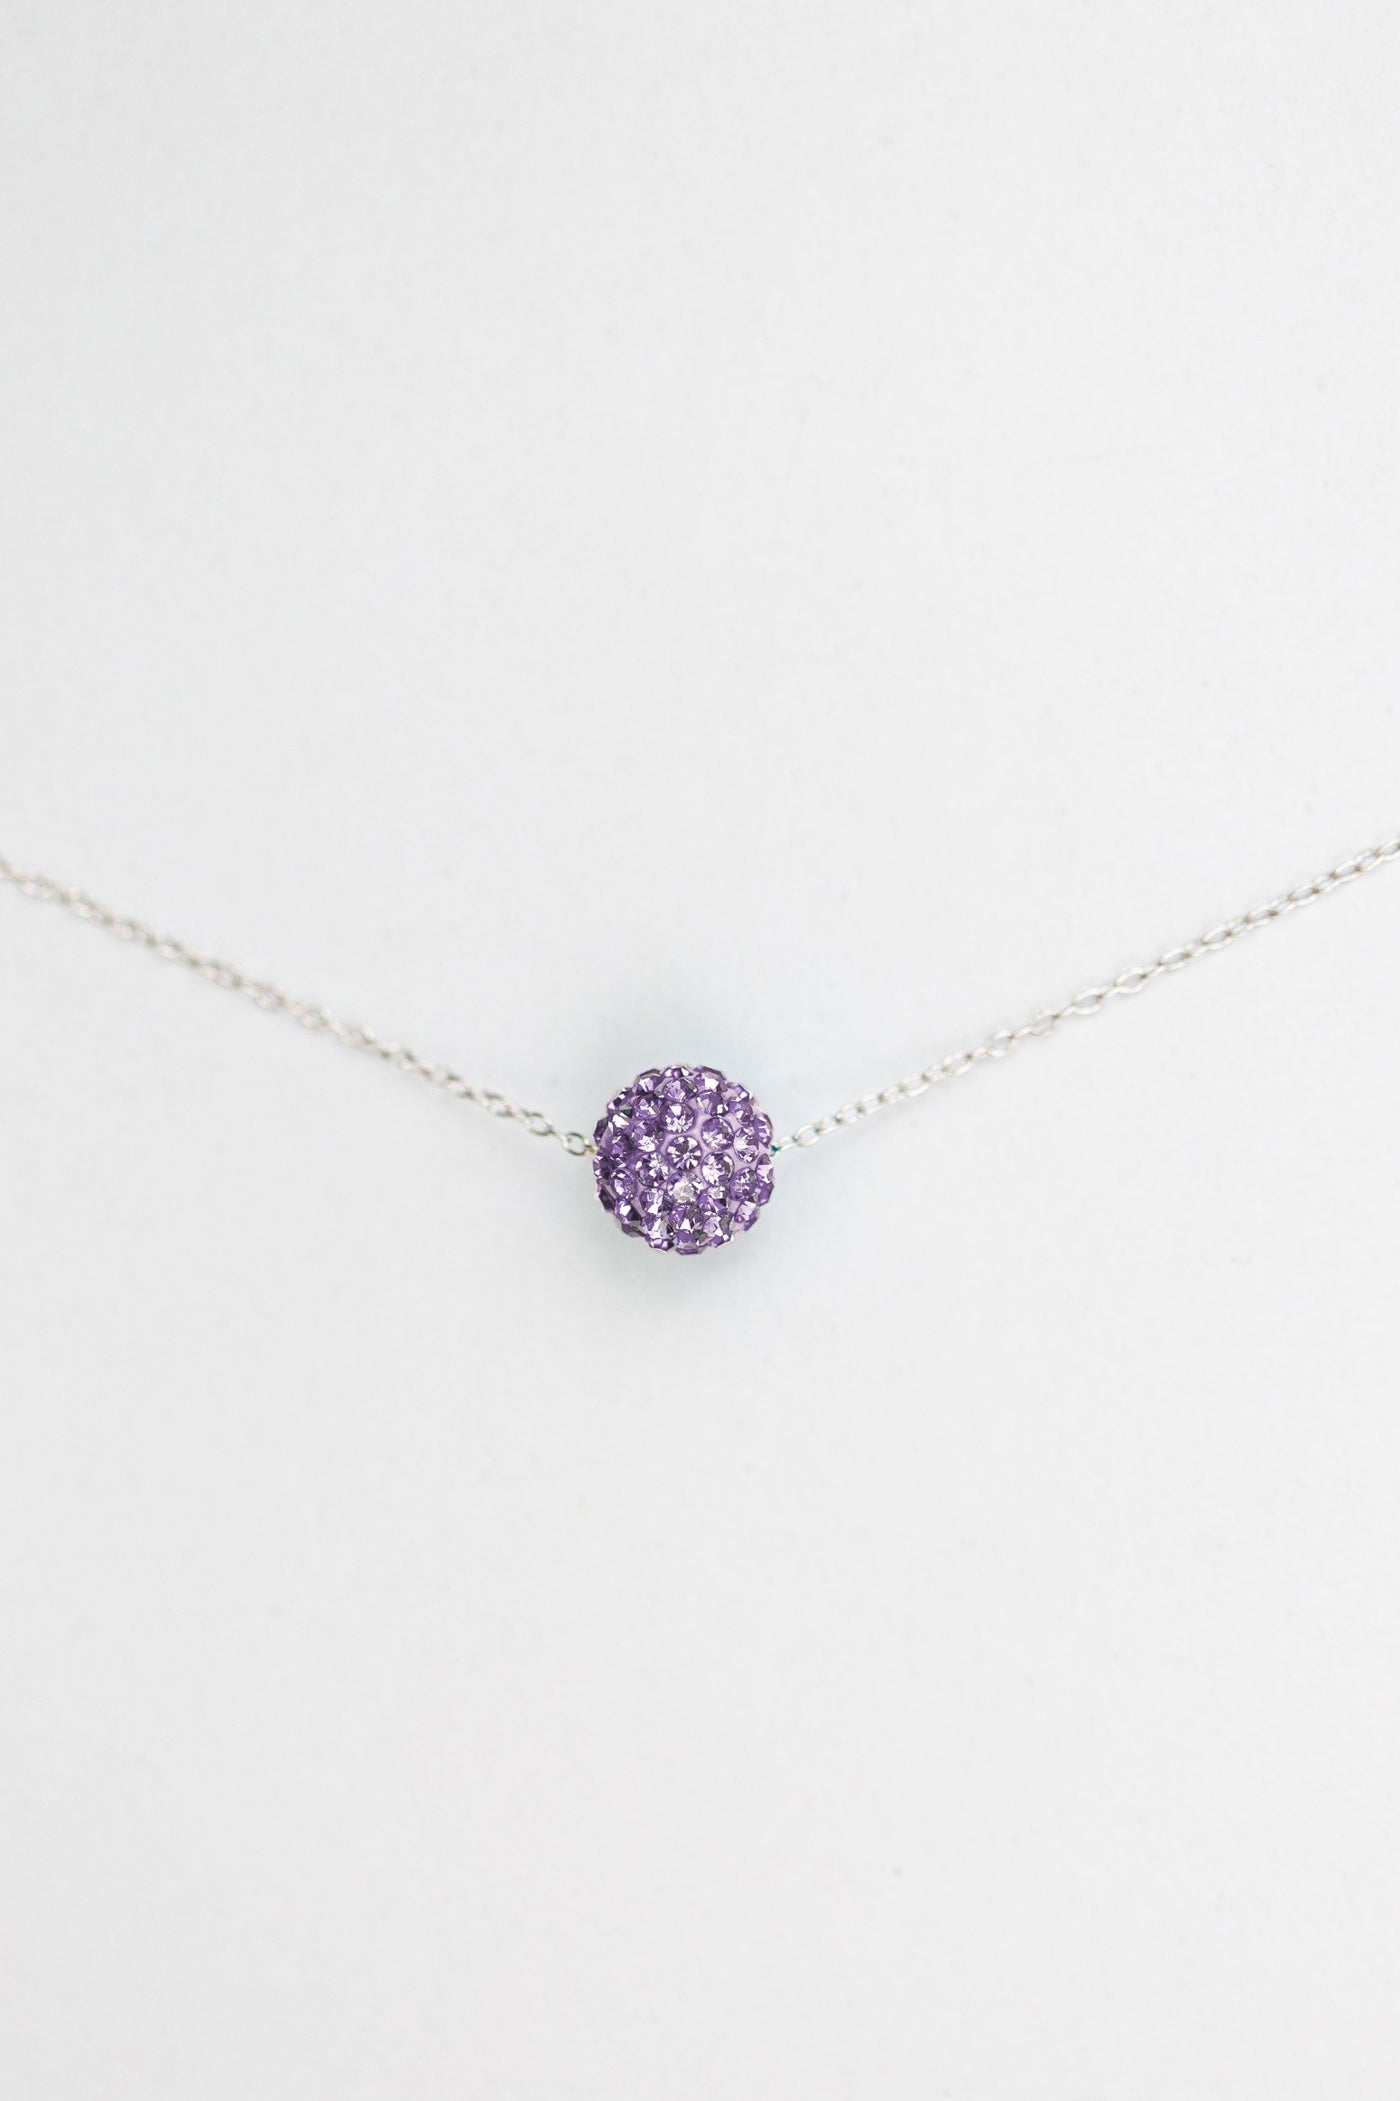 10mm Disco Ball Crystal Sterling Silver Necklace in Light Amethyst | Annie and Sisters